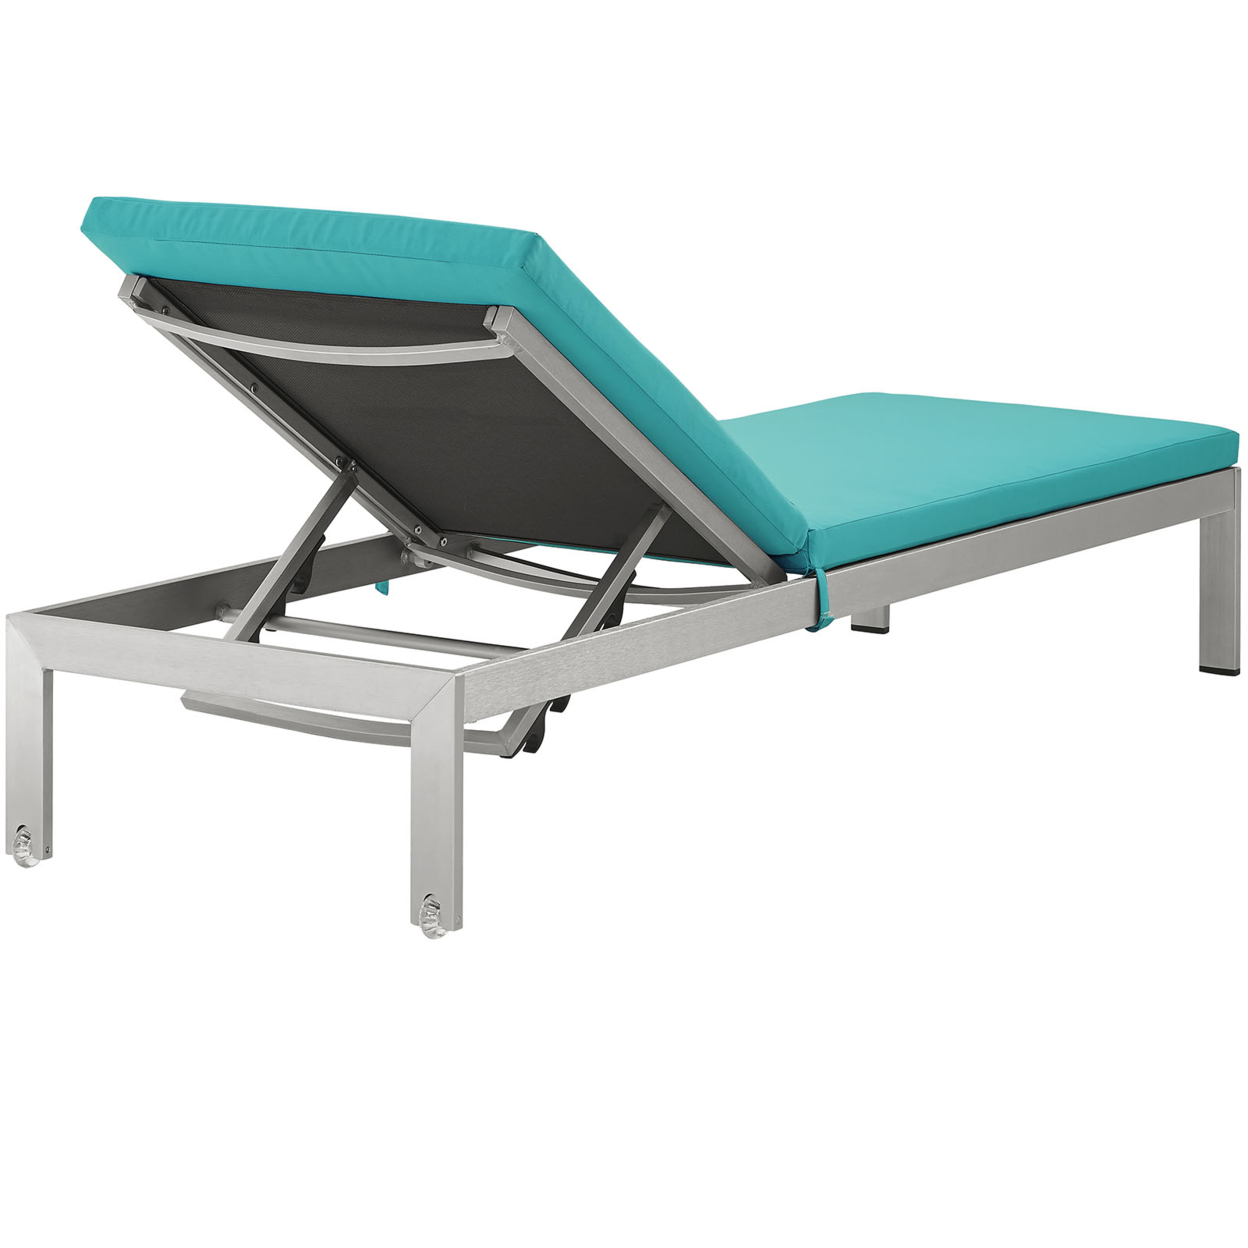 Shore Outdoor Patio Aluminum Chaise with Cushions Silver Turquoise - image 4 of 5